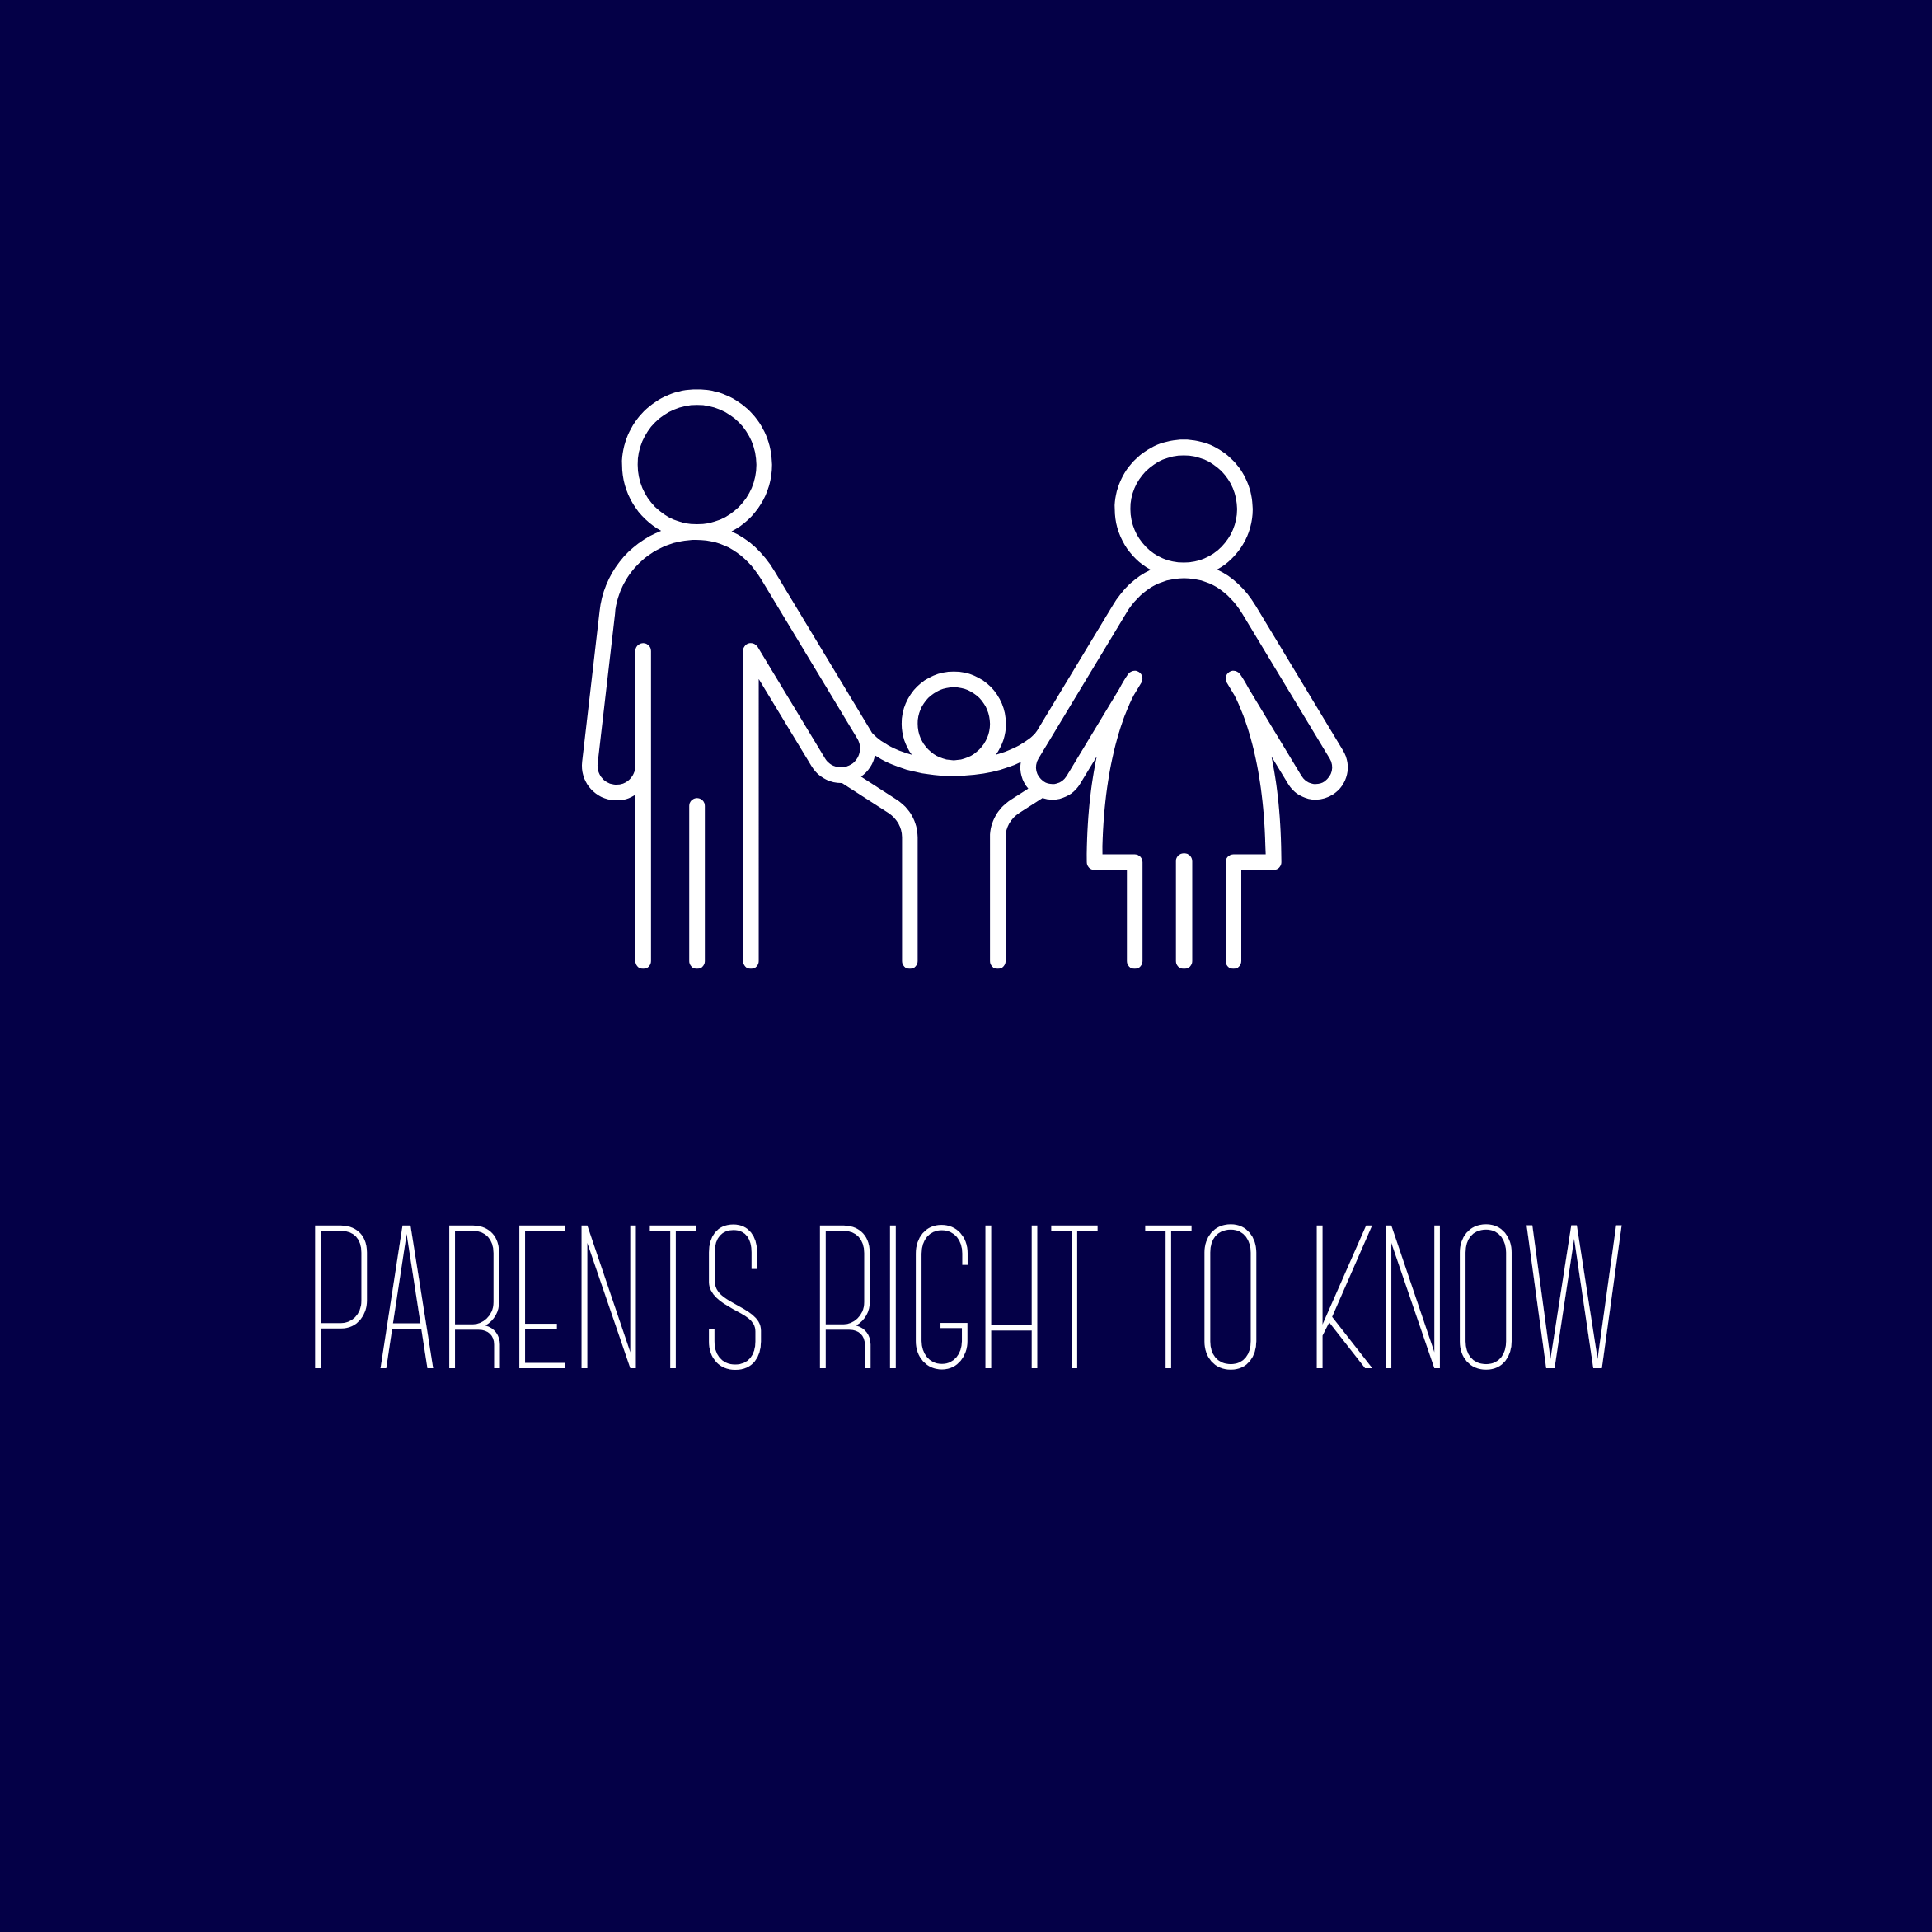 Parents Right to Know